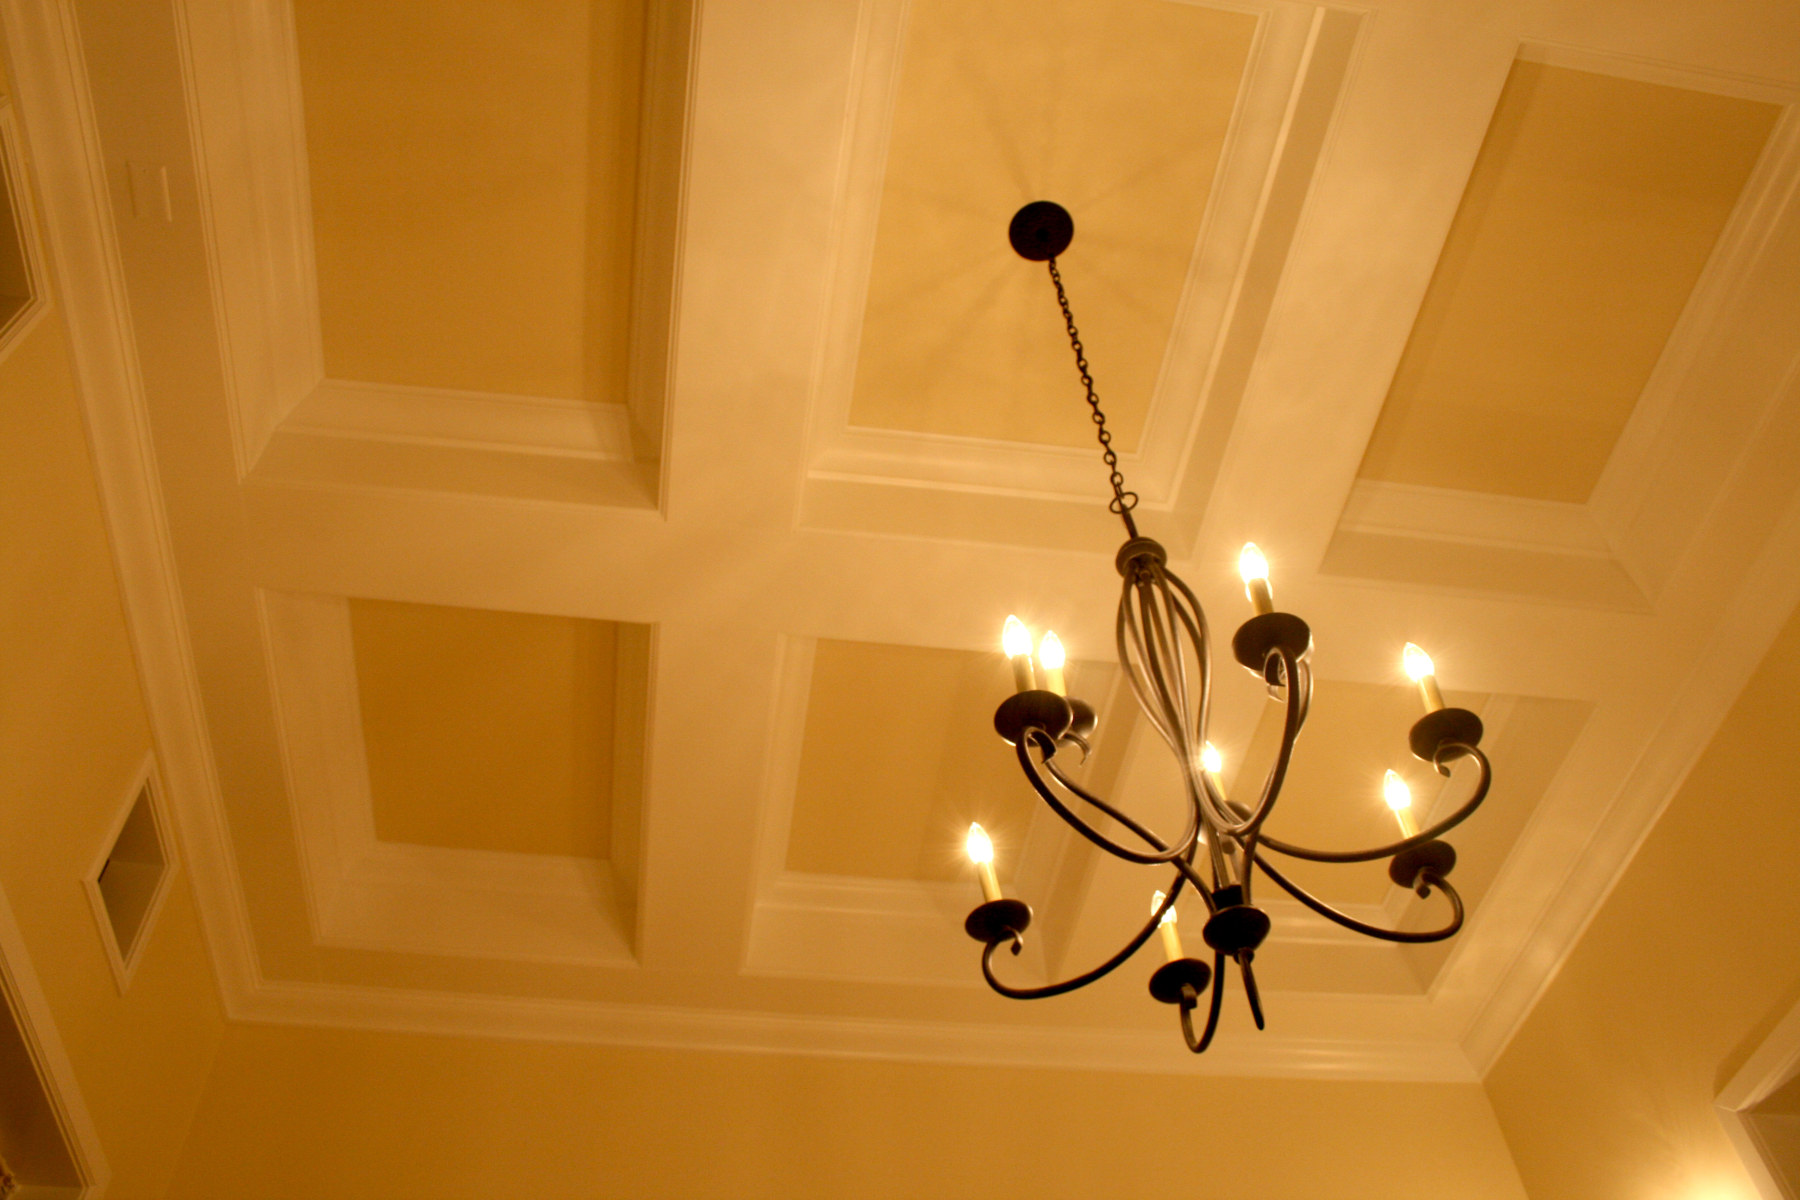 Crown nolding and high ceilings at Dining Room